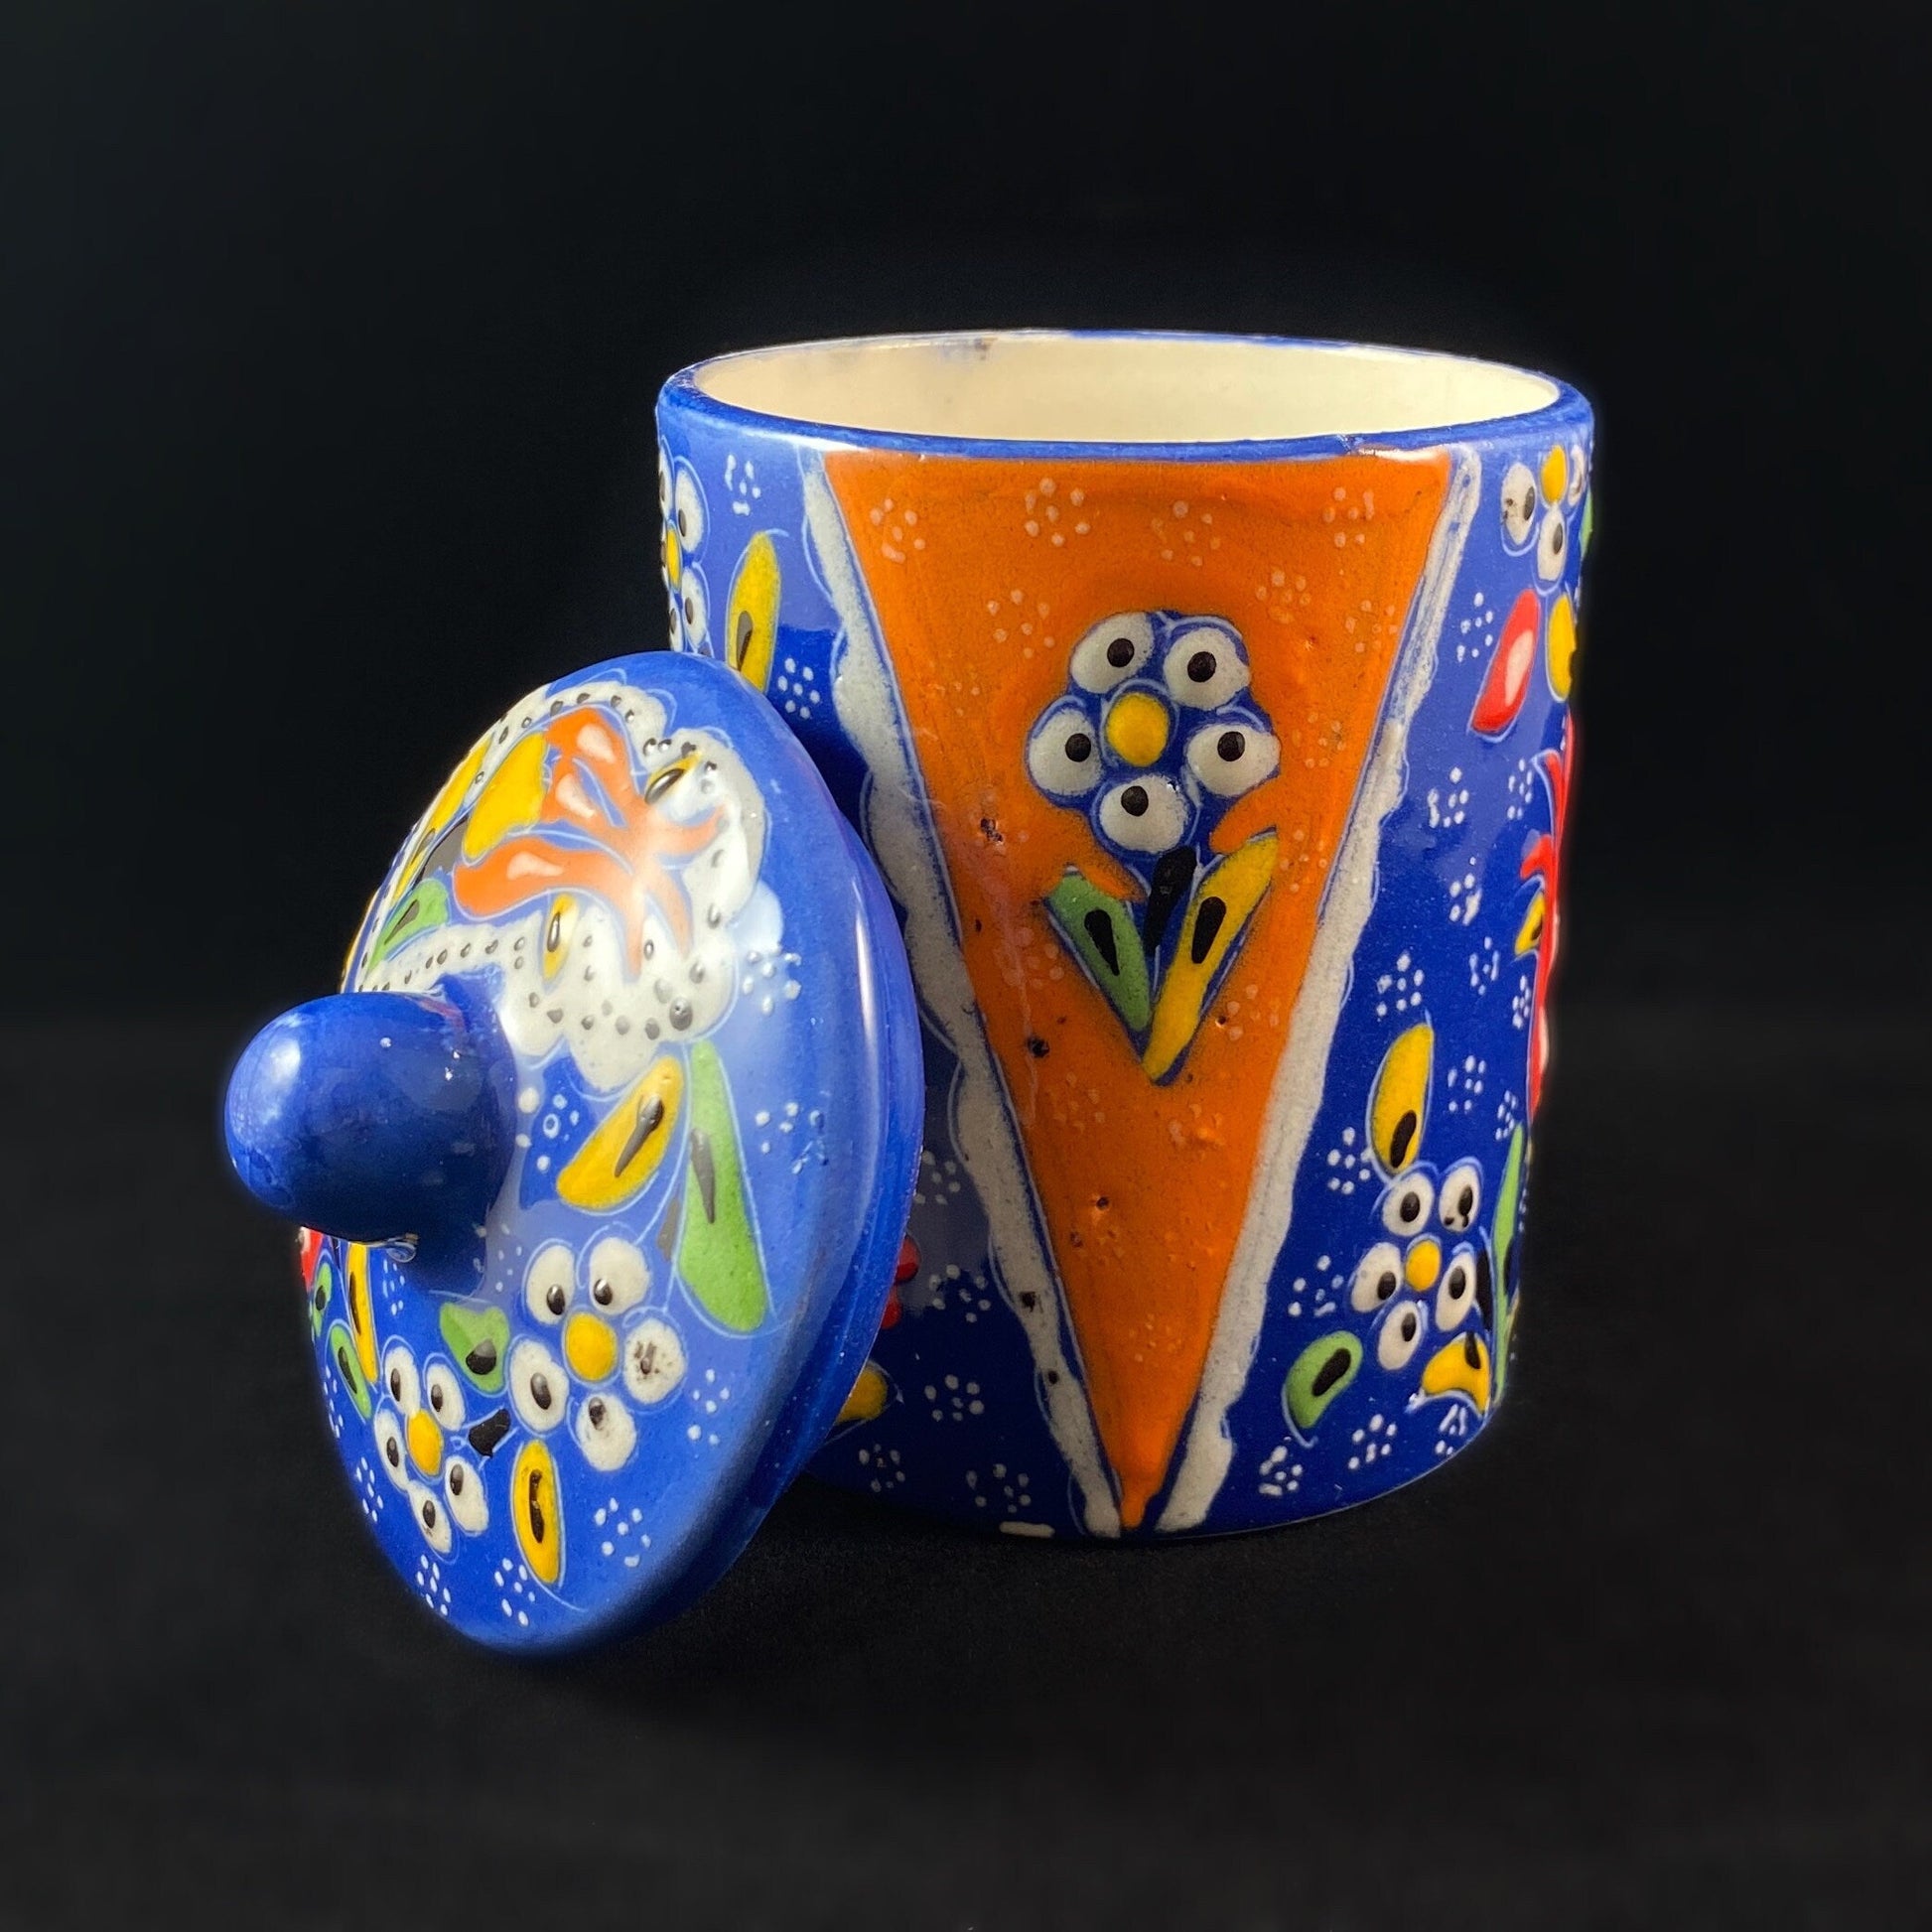 Handmade Canister with Top, Functional and Decorative Turkish Pottery, Cottagecore Style, Blue